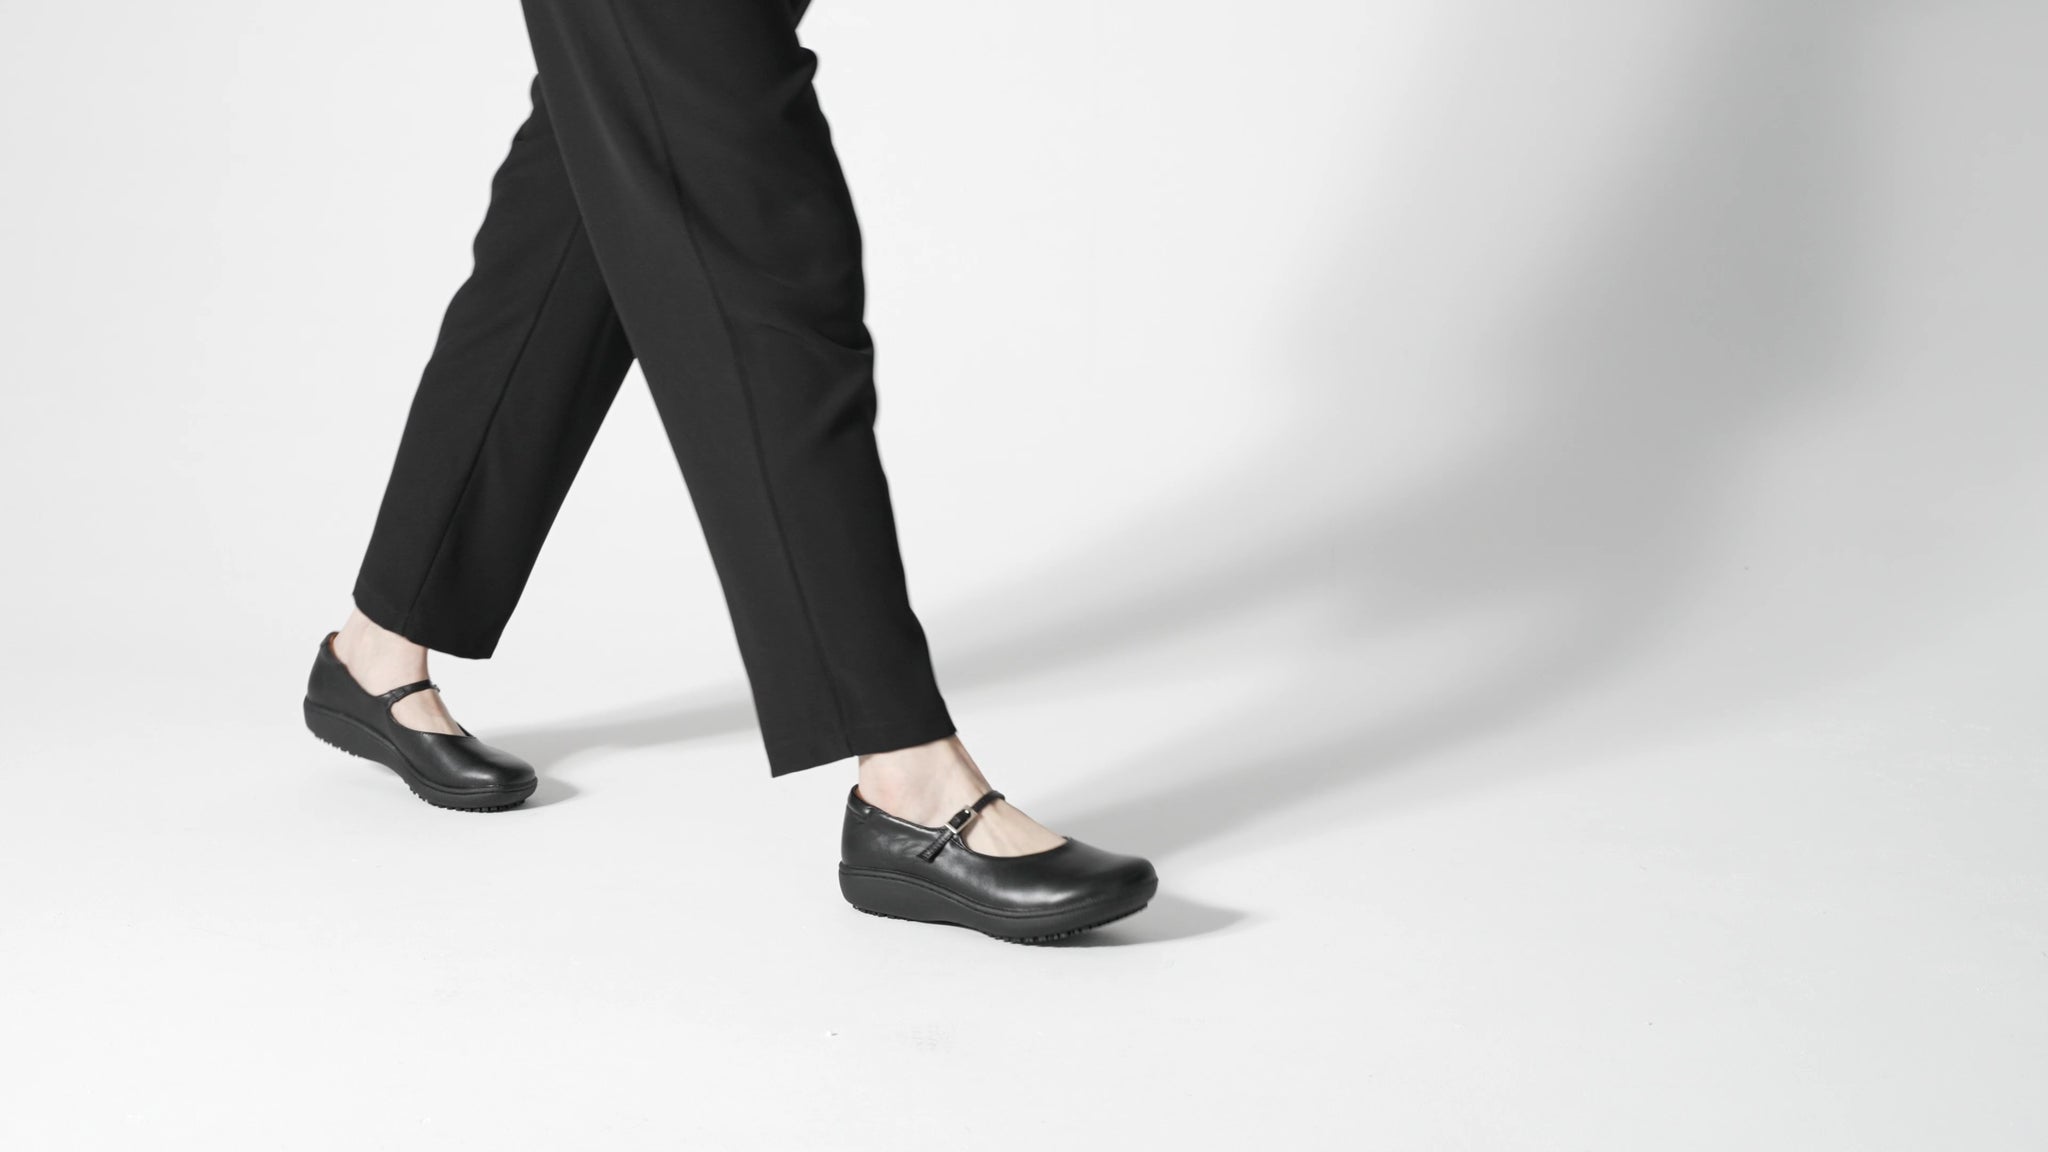 The Mary Jane II from Shoes For Crews are slip-resistant dress shoes designed to provide comfort throughout the day, product video.